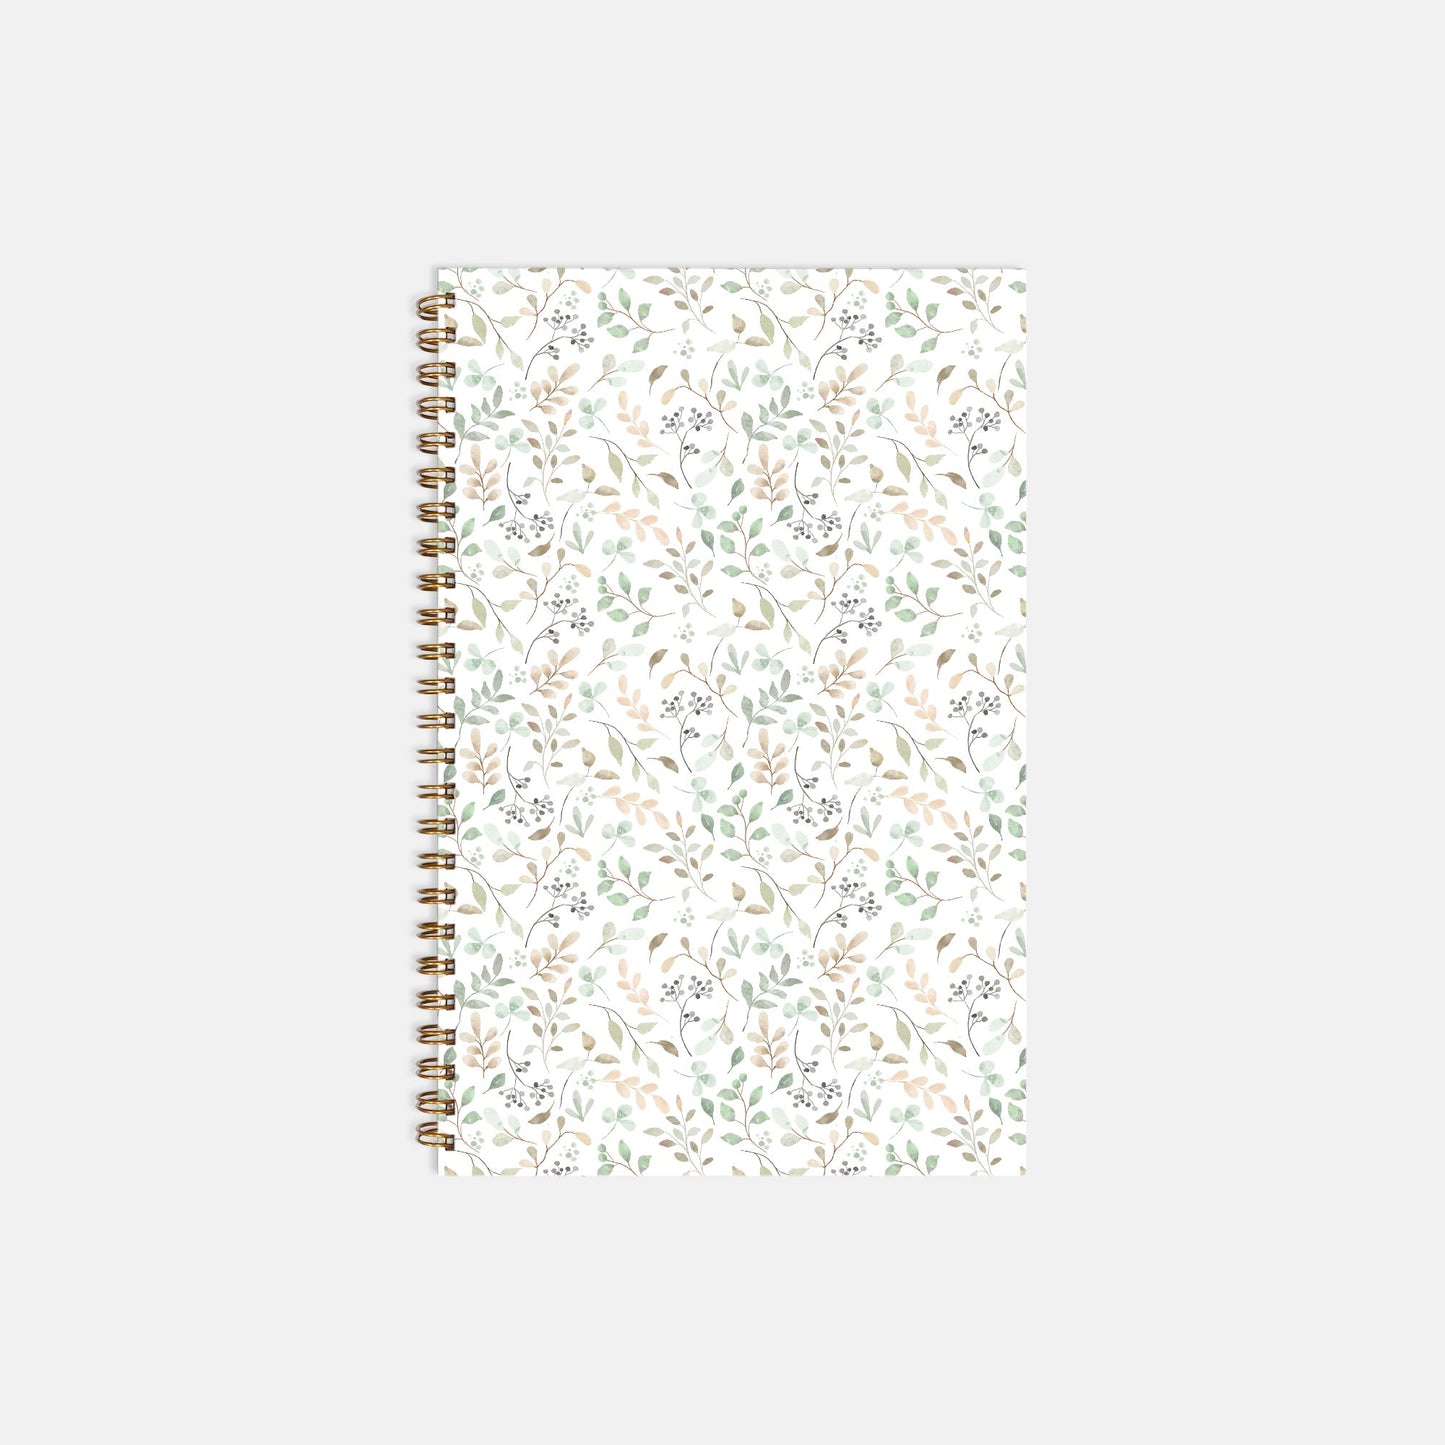 Leaves and branches Notebook Hardcover Spiral 5.5 x 8.5